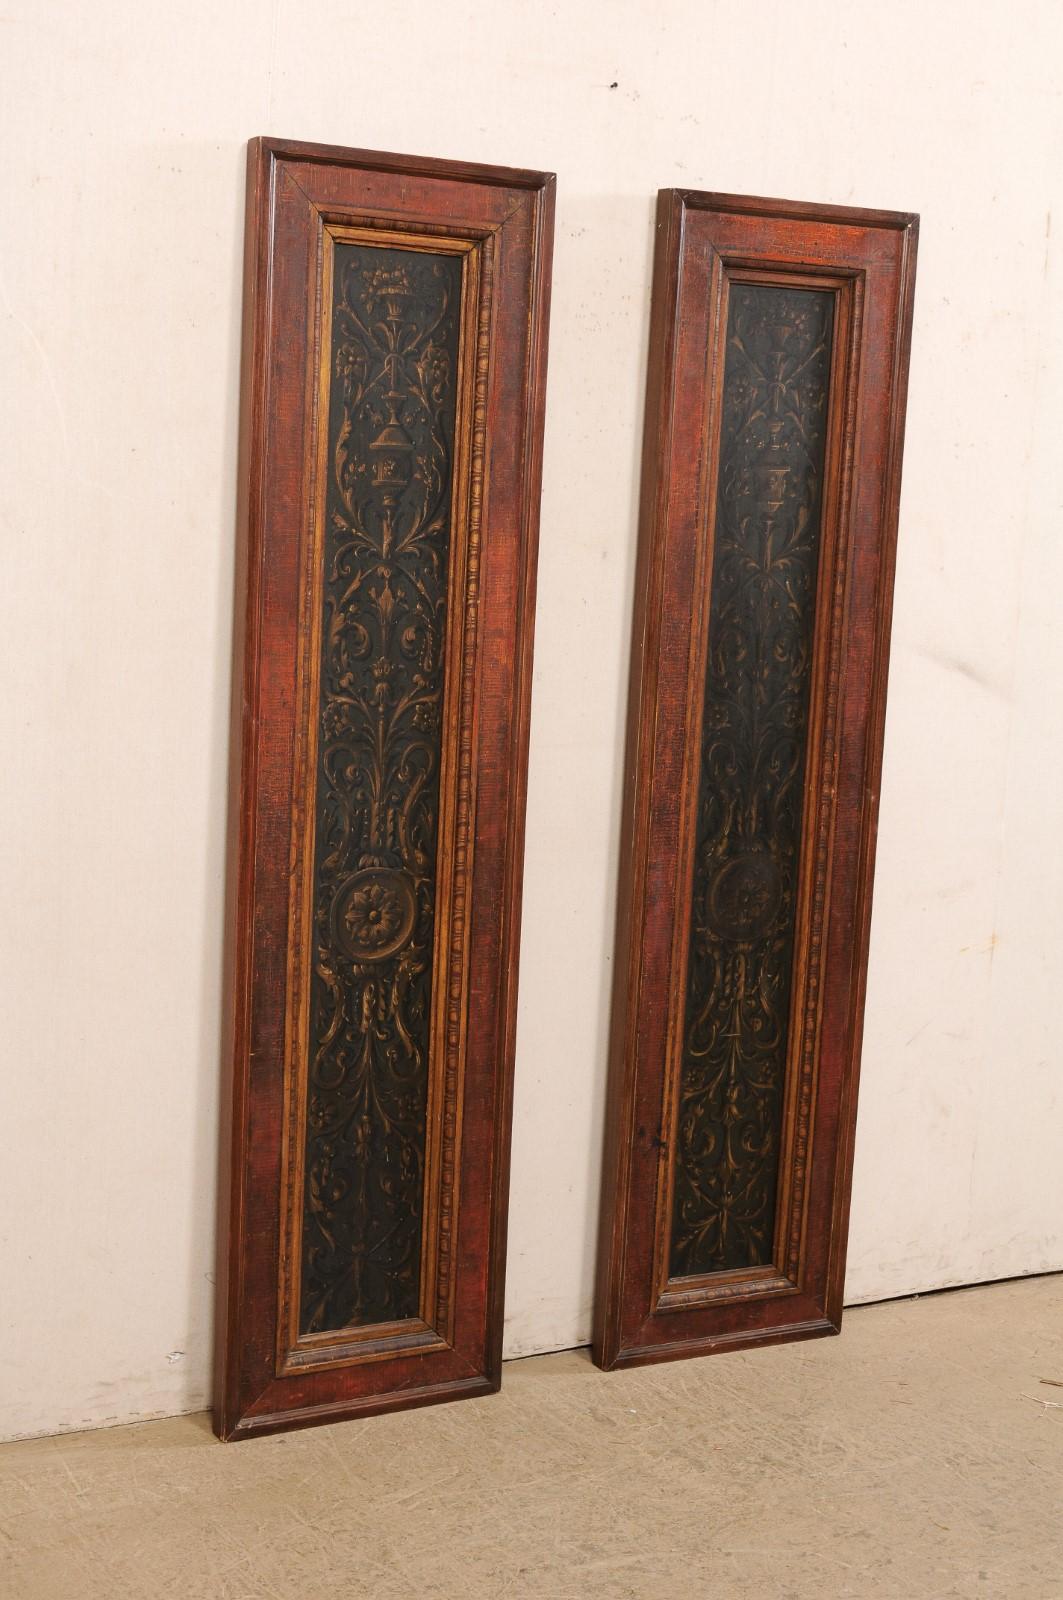 19th Century French Pair of Decoratively Hand-Painted Wooden Wall Panels For Sale 4